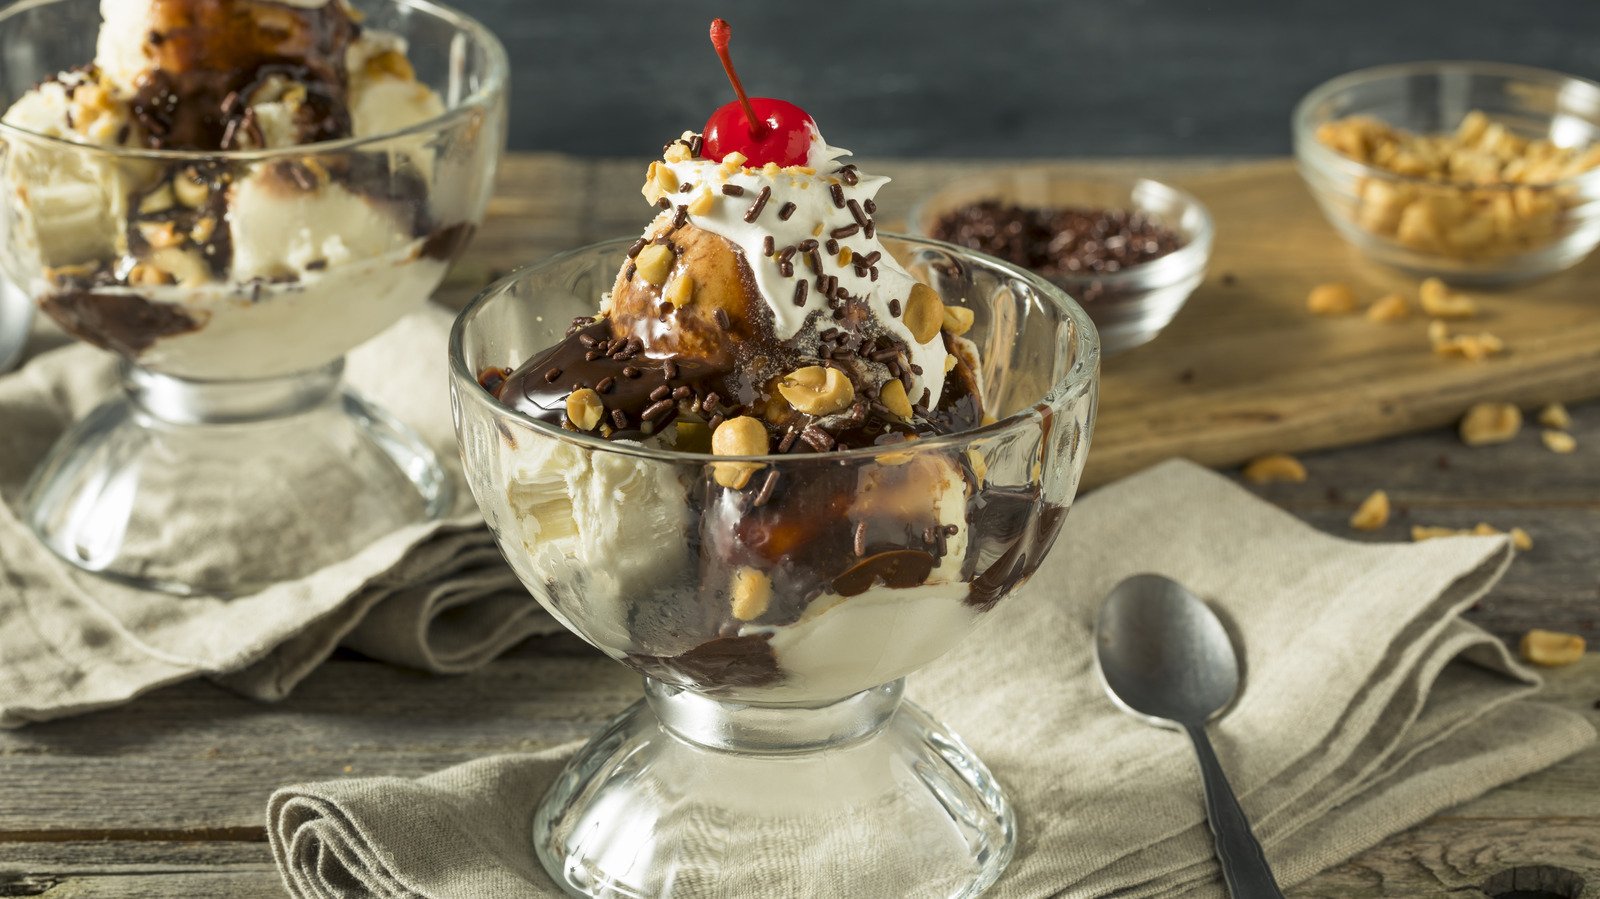 Ice cream sundaes were invented because of a bizarre law